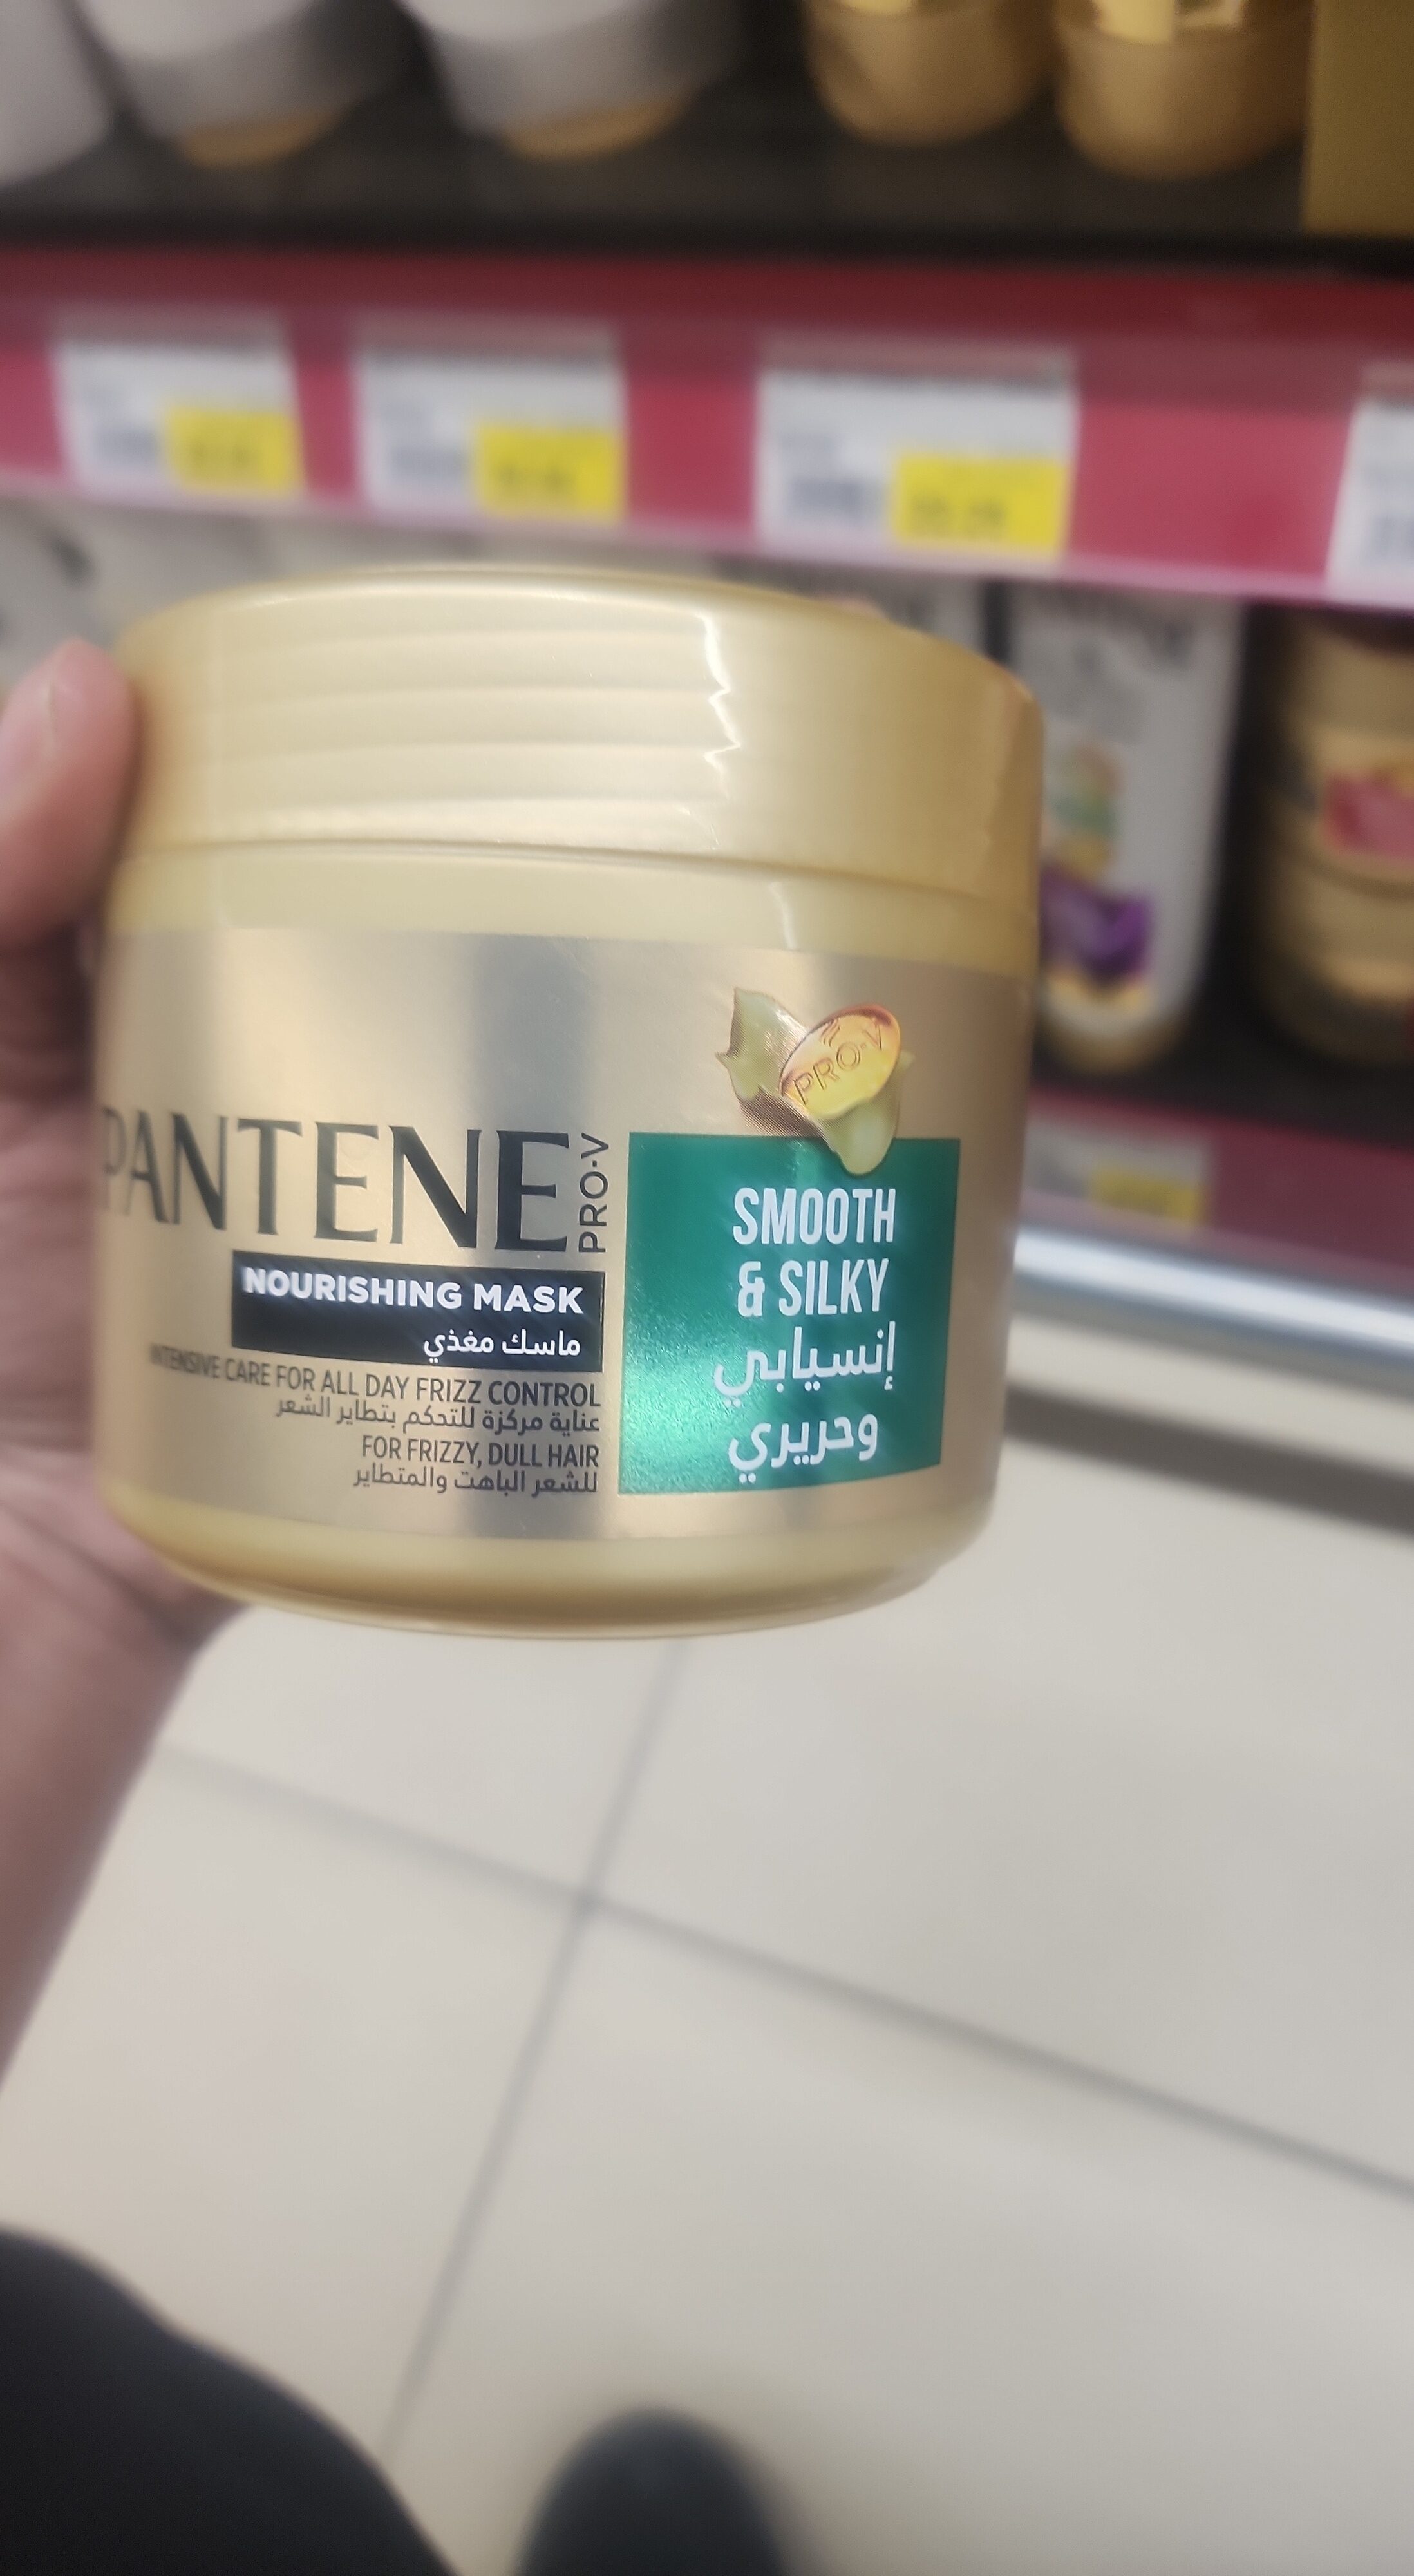 Smooth and silky mask - Tuote - en